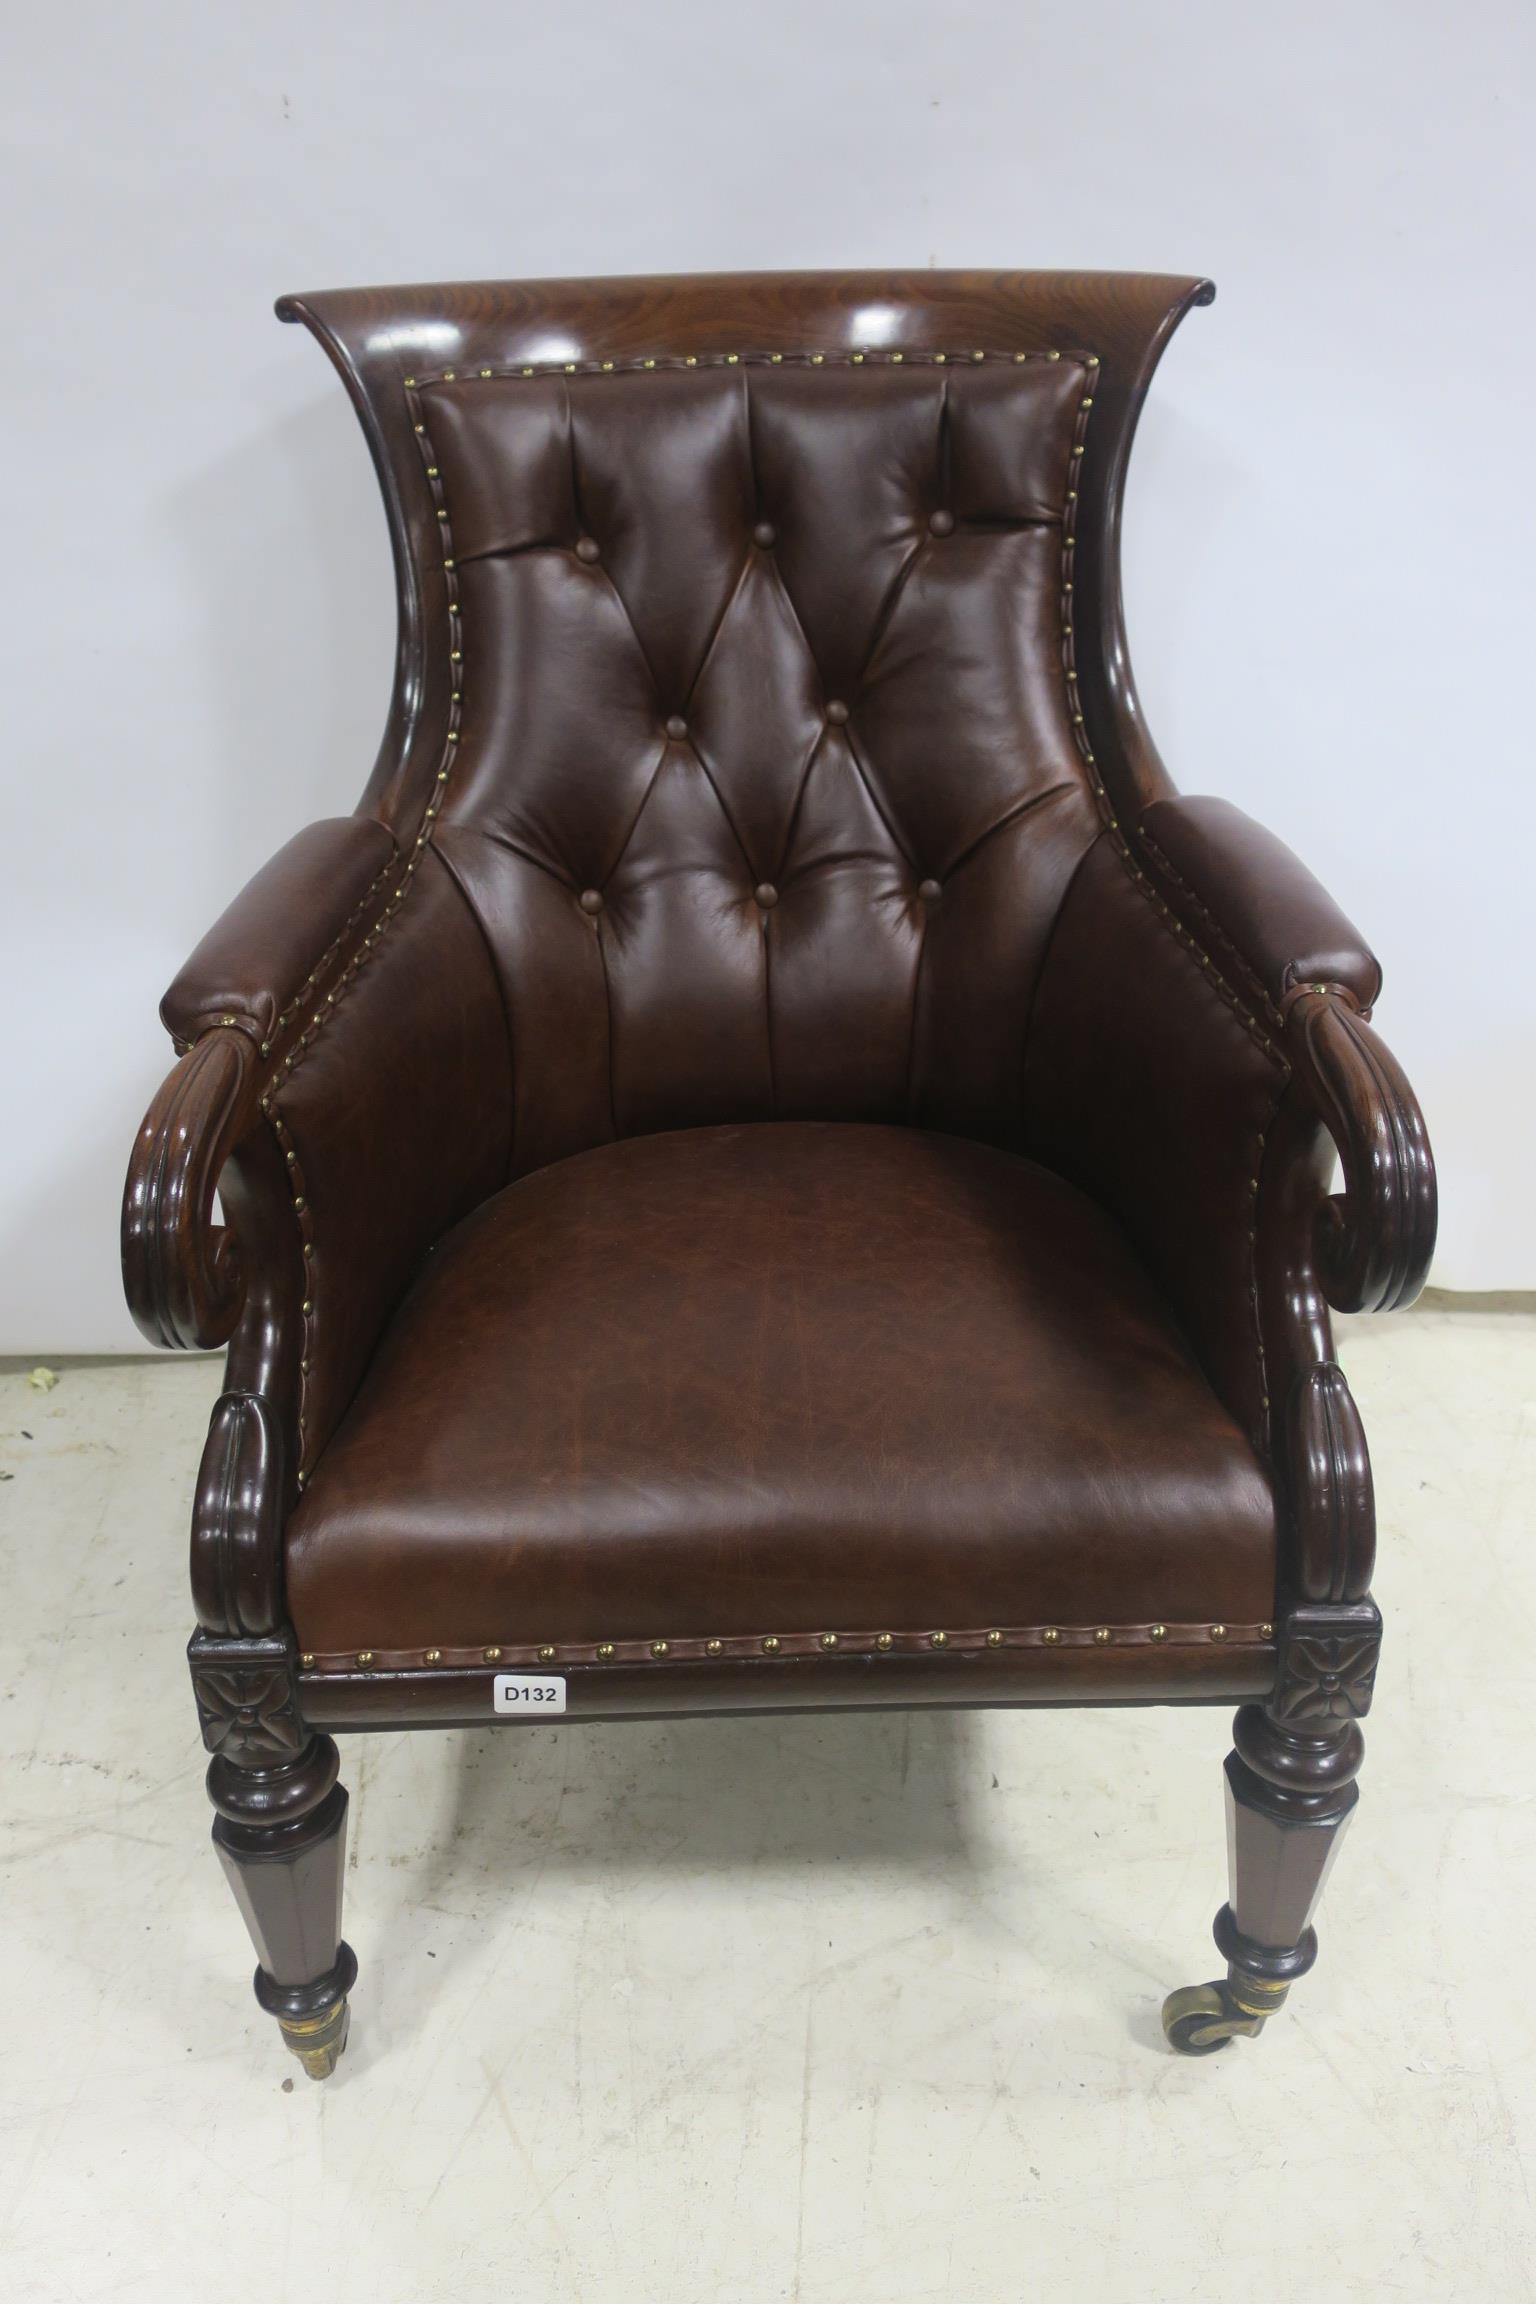 A VERY FINE REGENCY MAHOGANY AND HIDE UPHOLSTERED LIBRARY CHAIR,